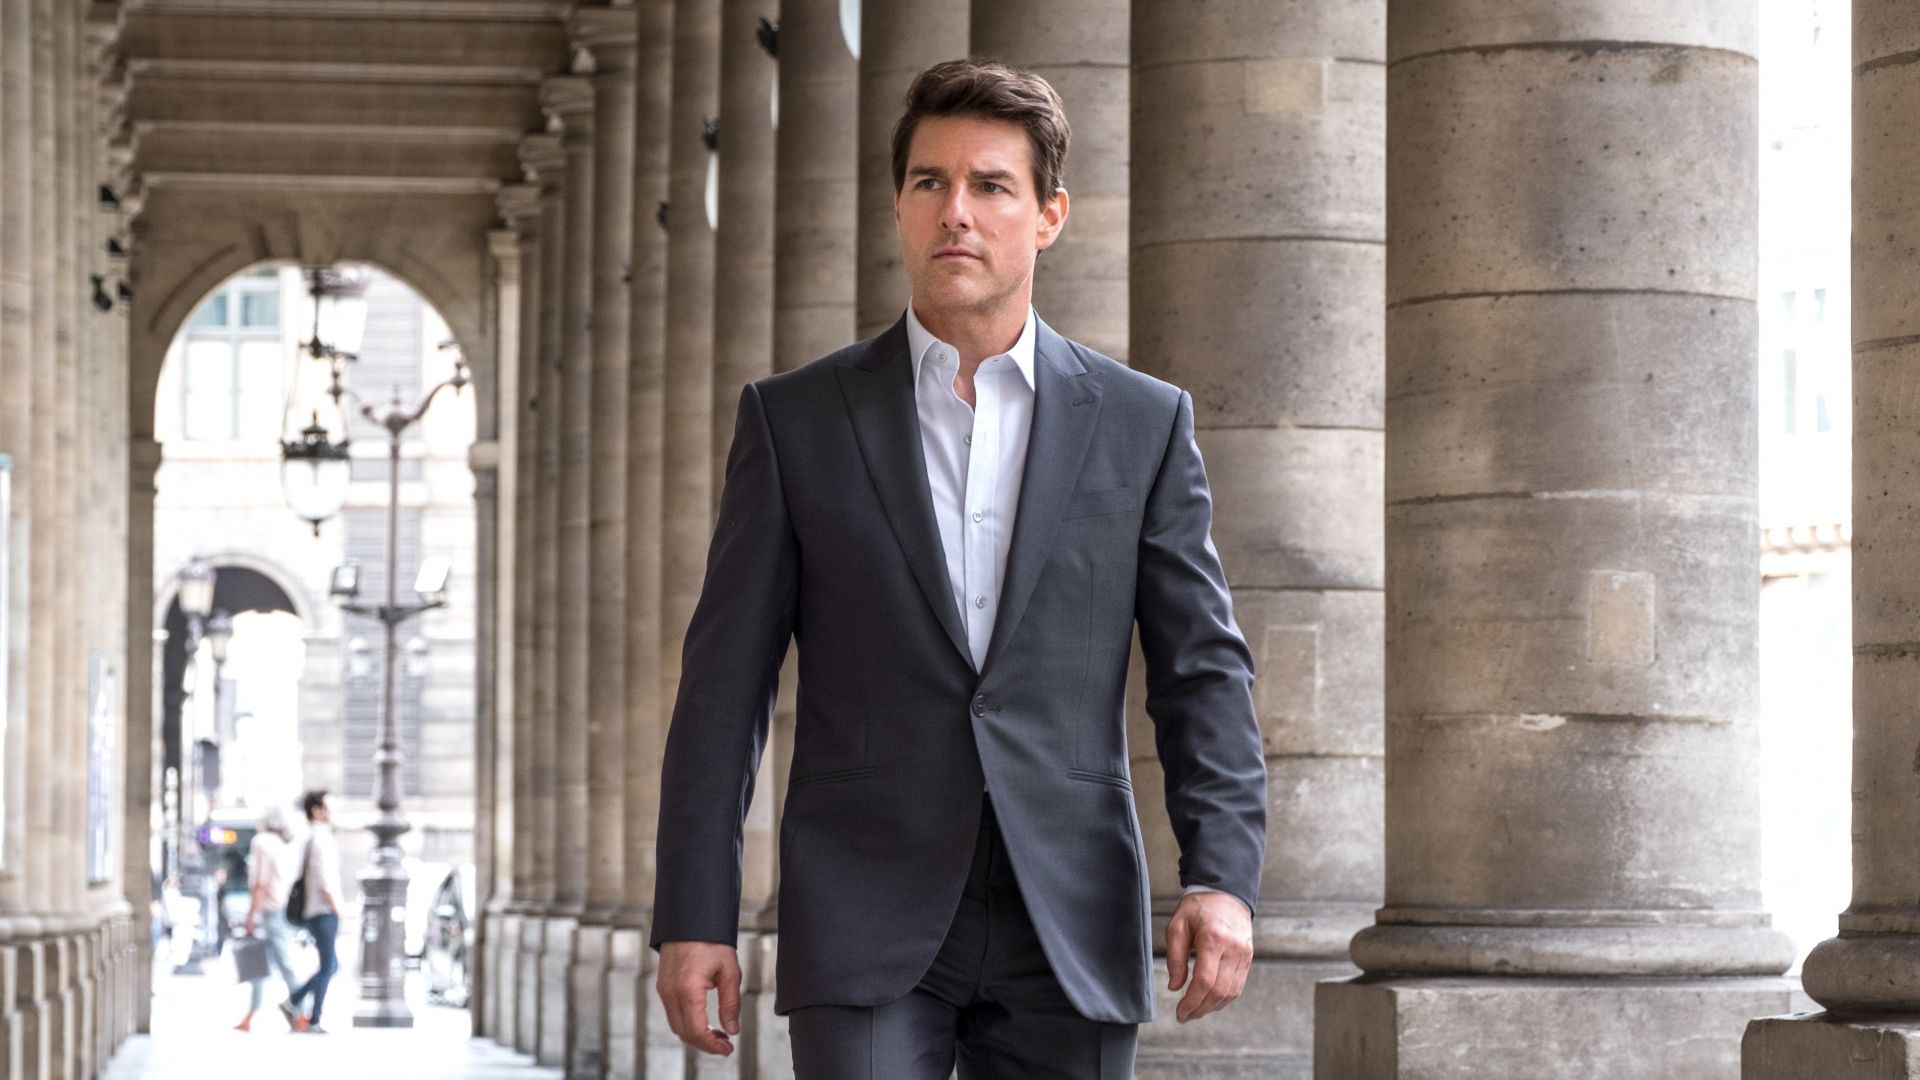 Handsome, tom cruise, movie, mission: impossible